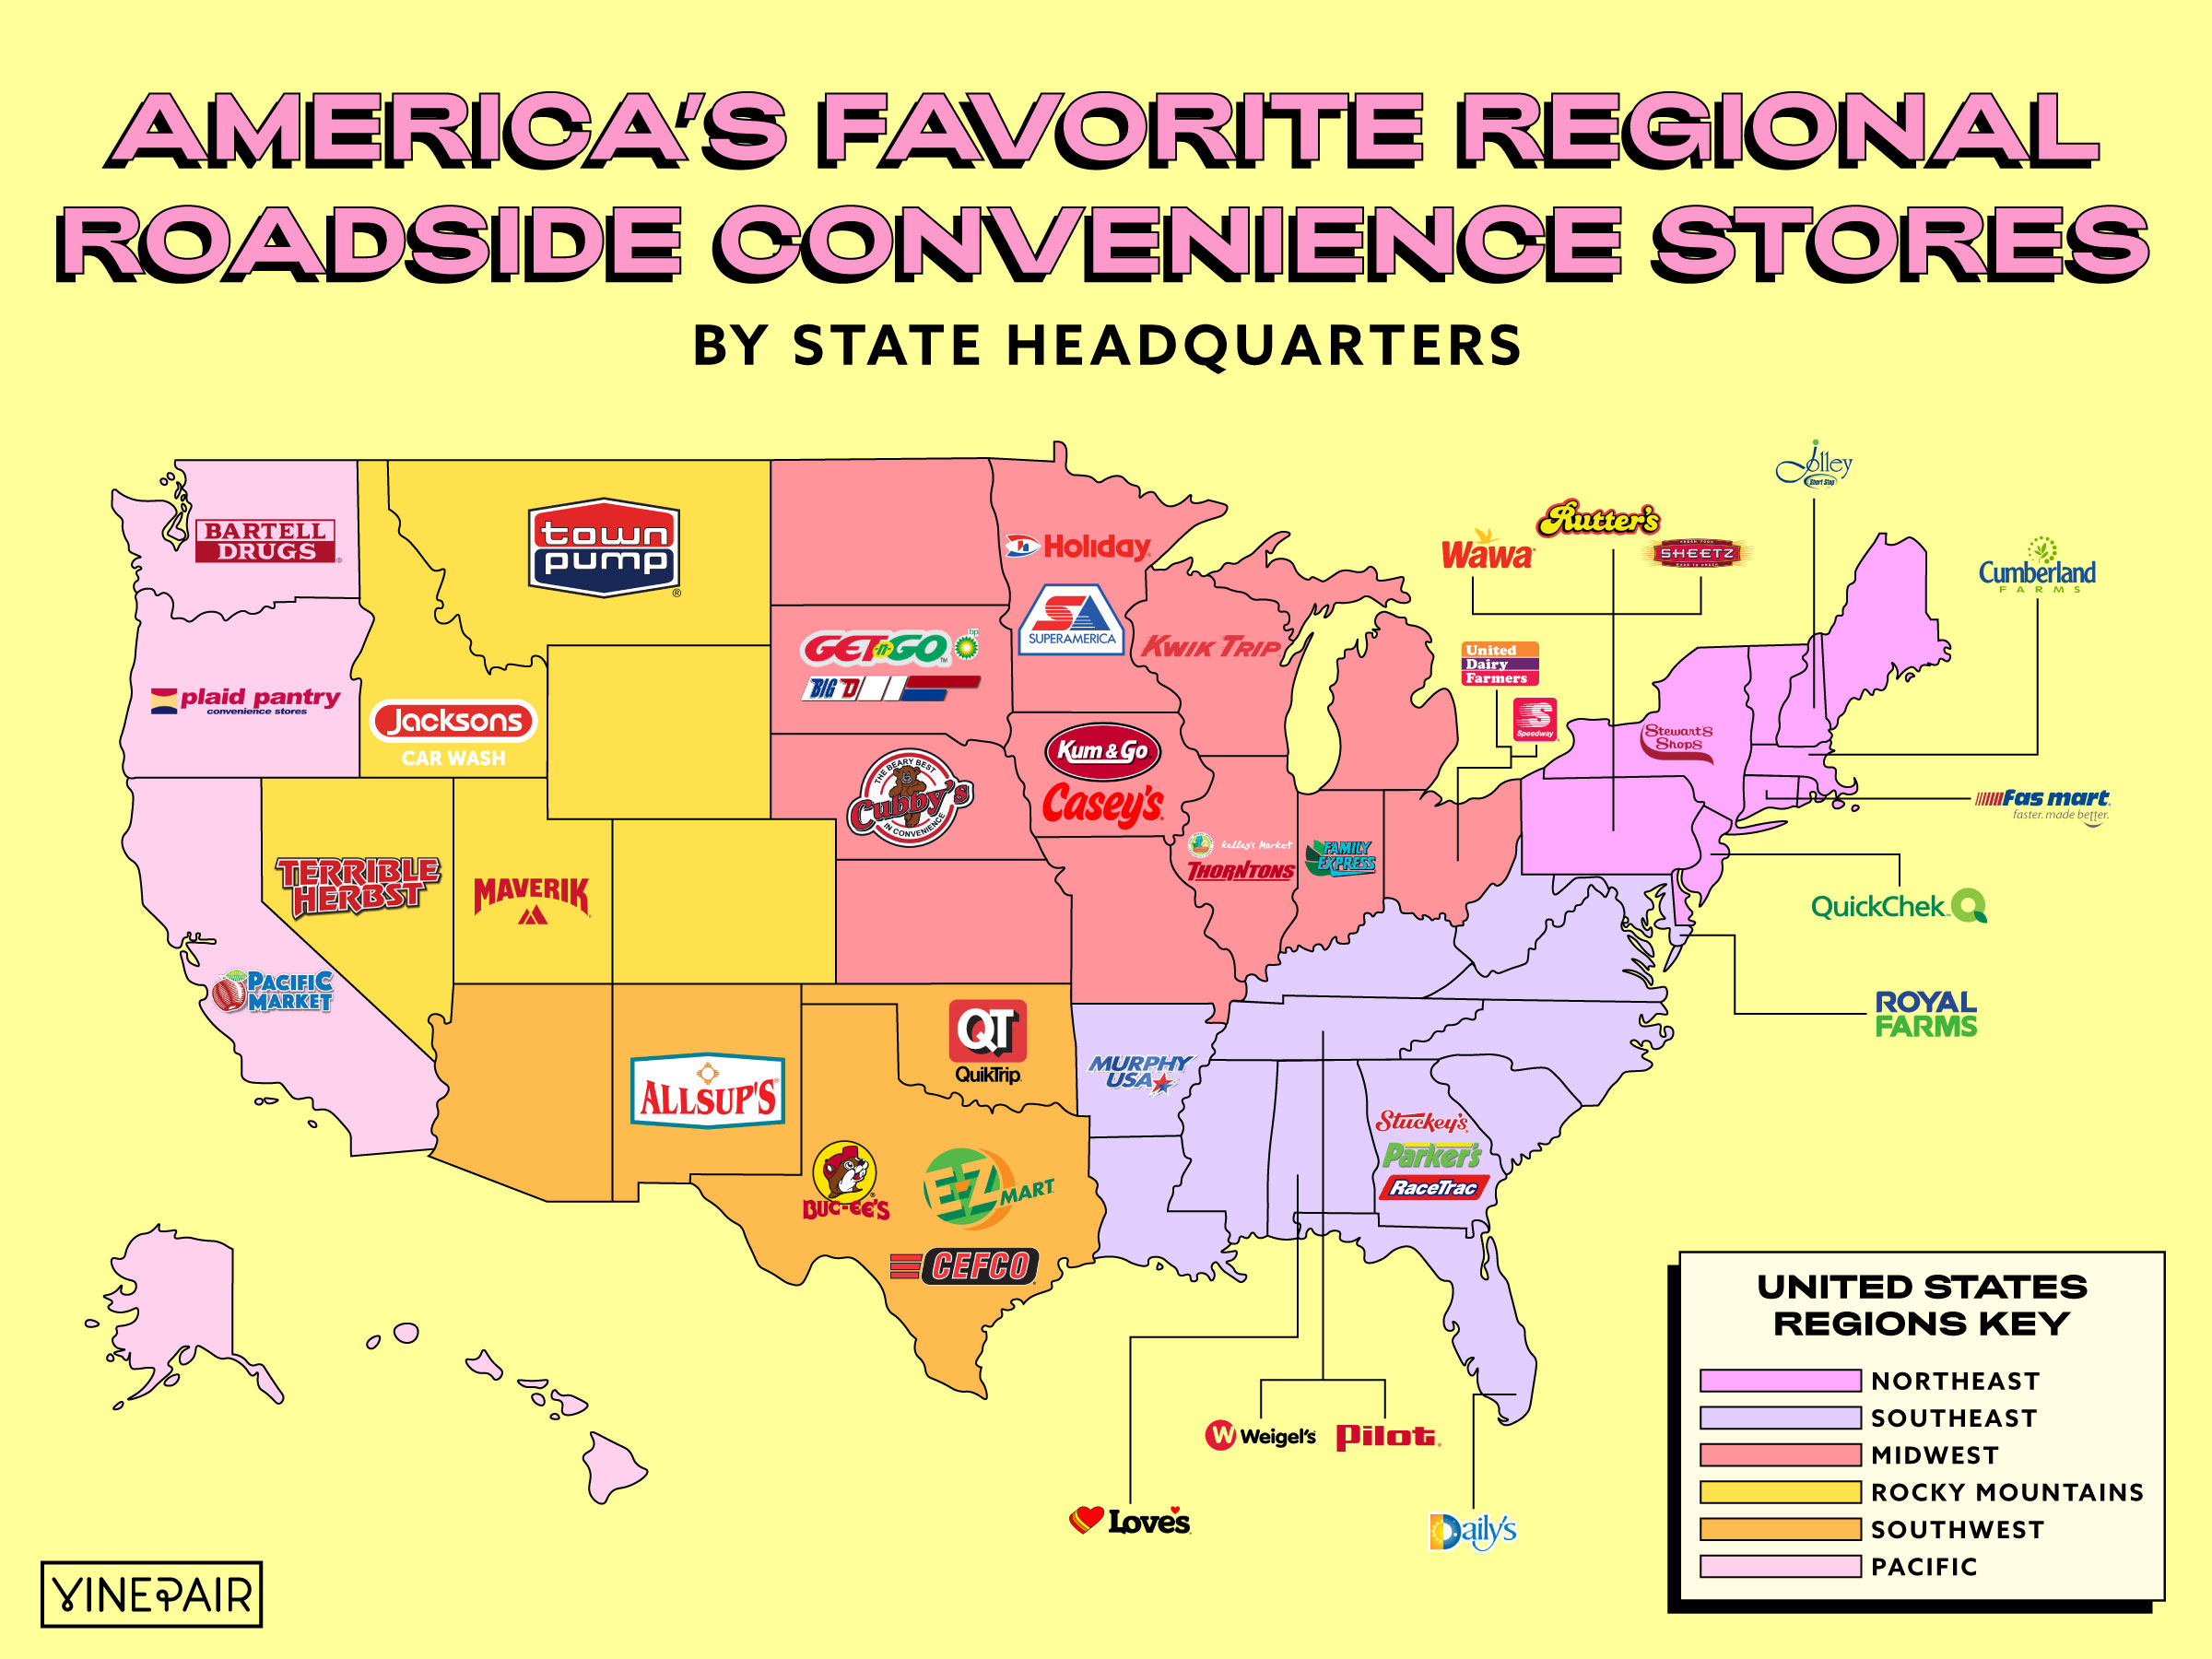 These are America’s Favorite Regional Roadside Convenience Stores